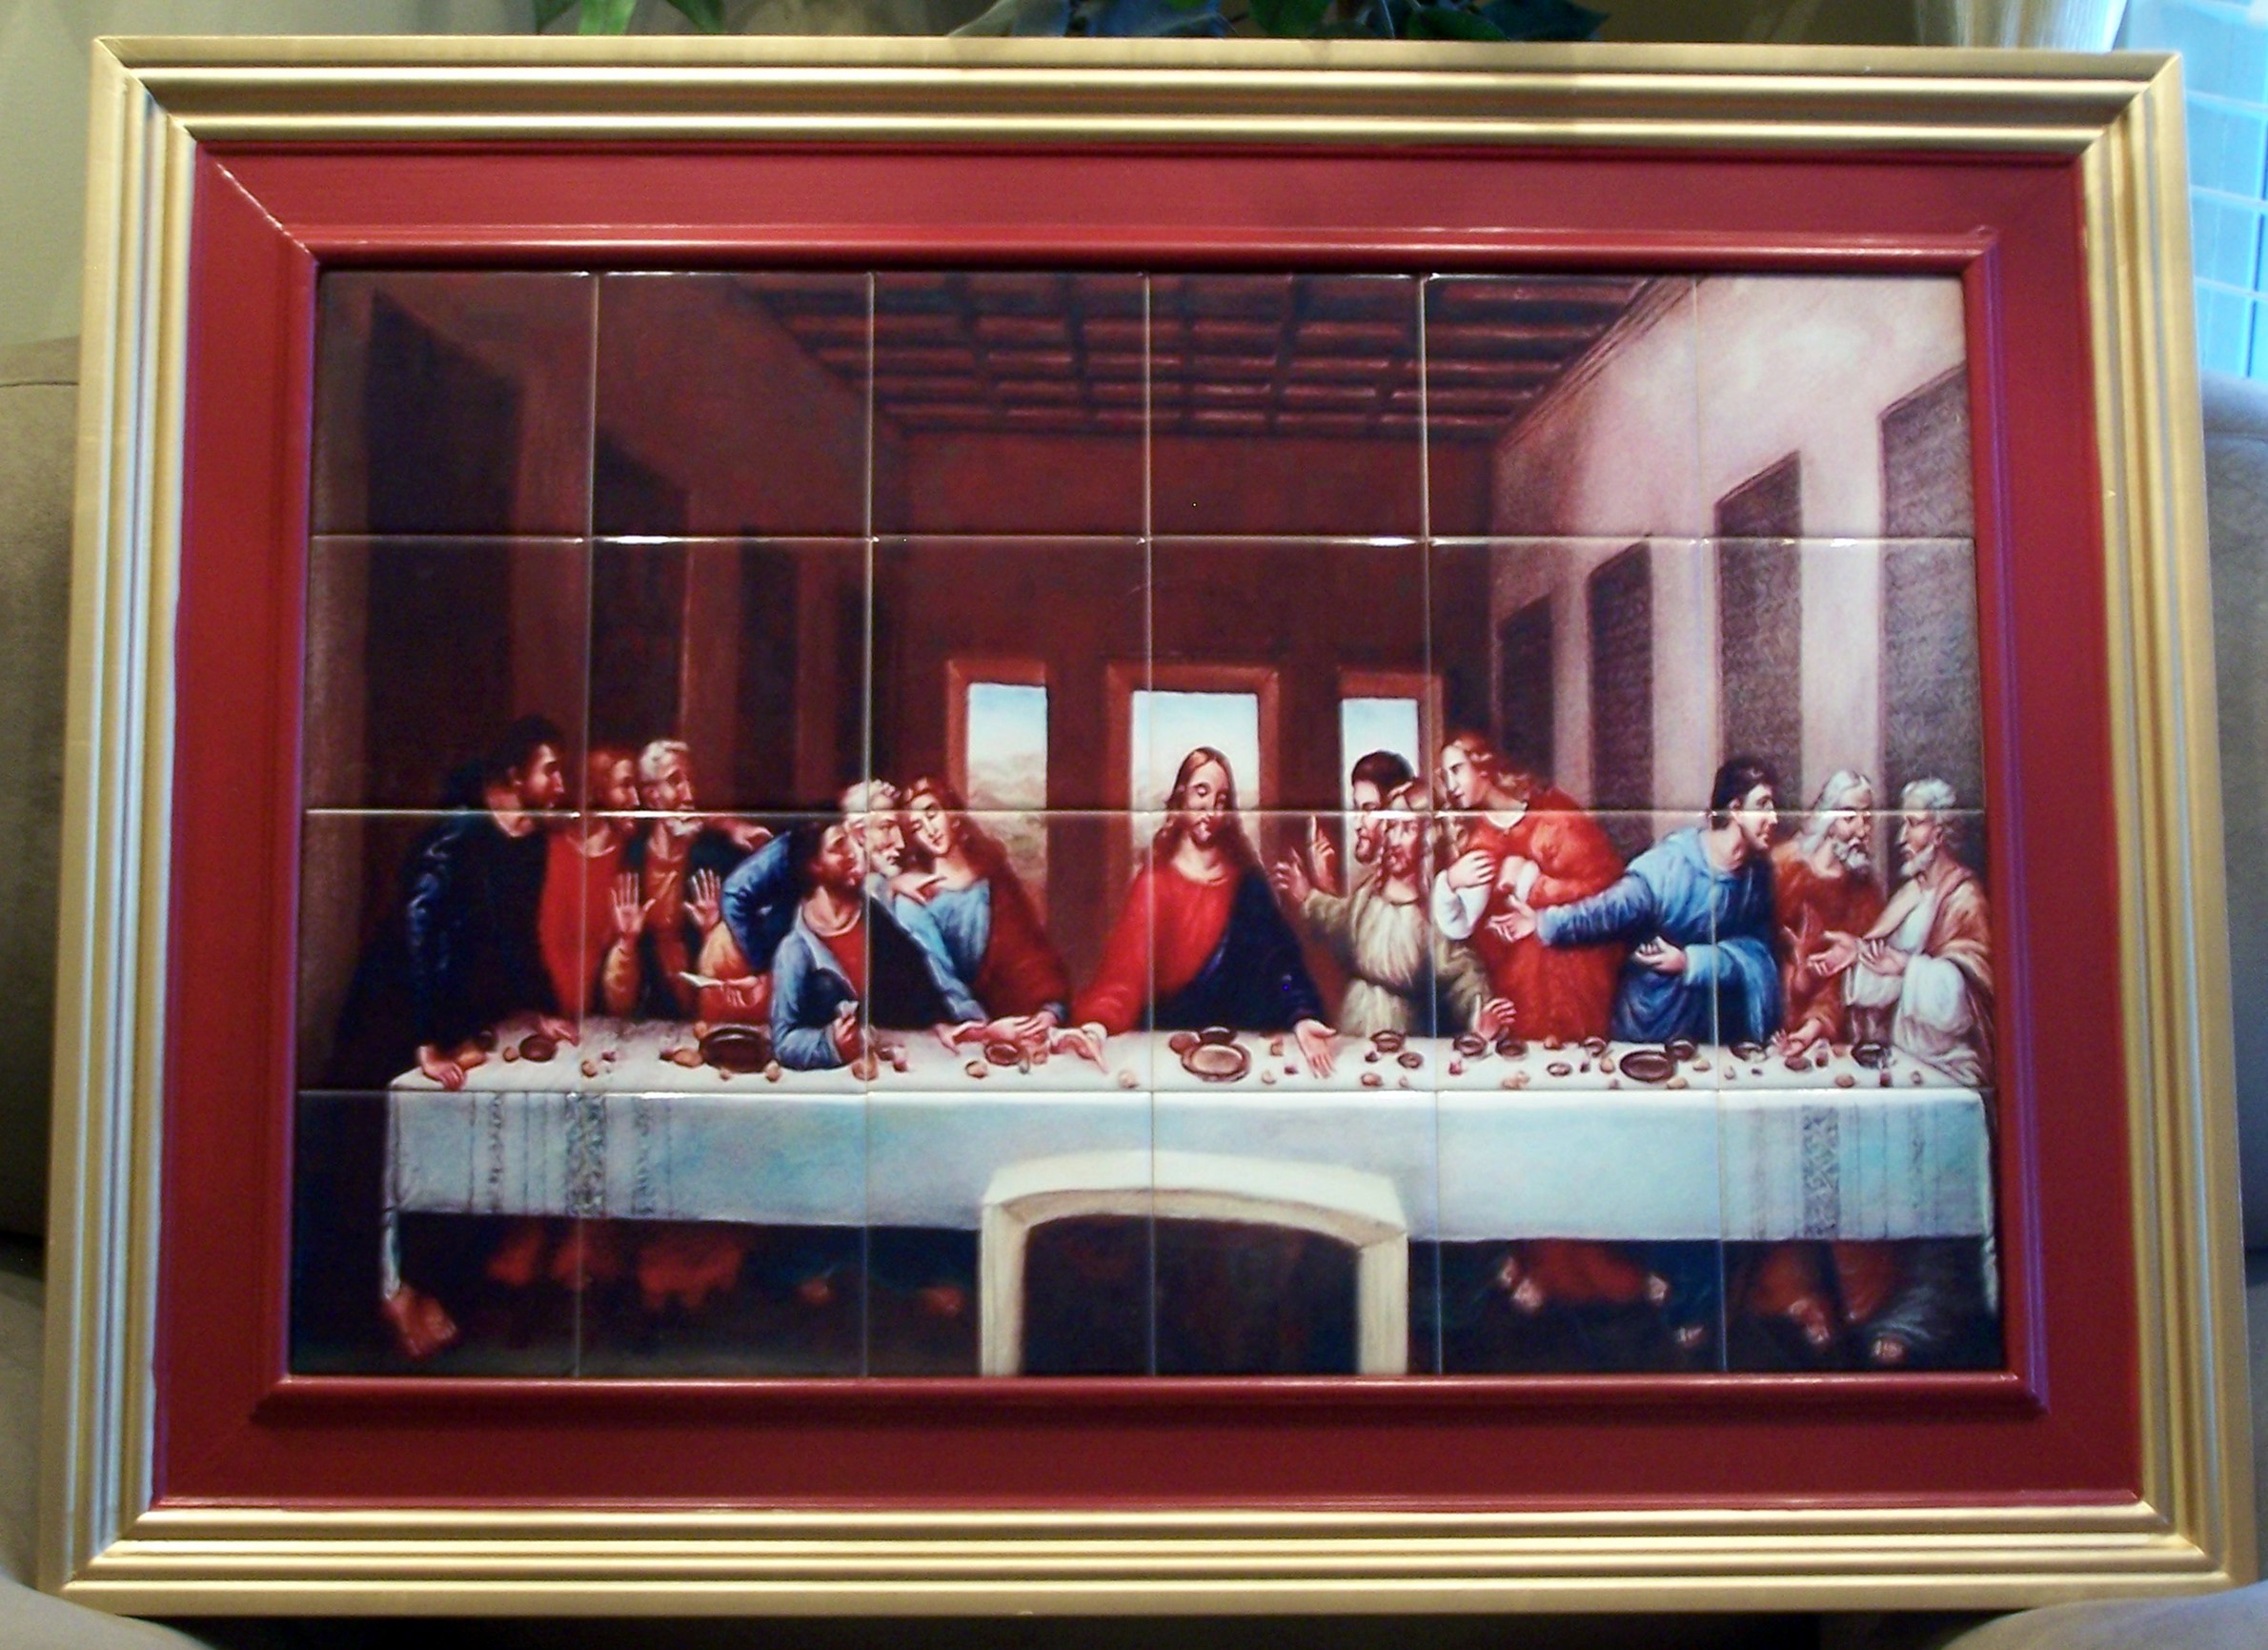 The Last Supper made with sublimation printing